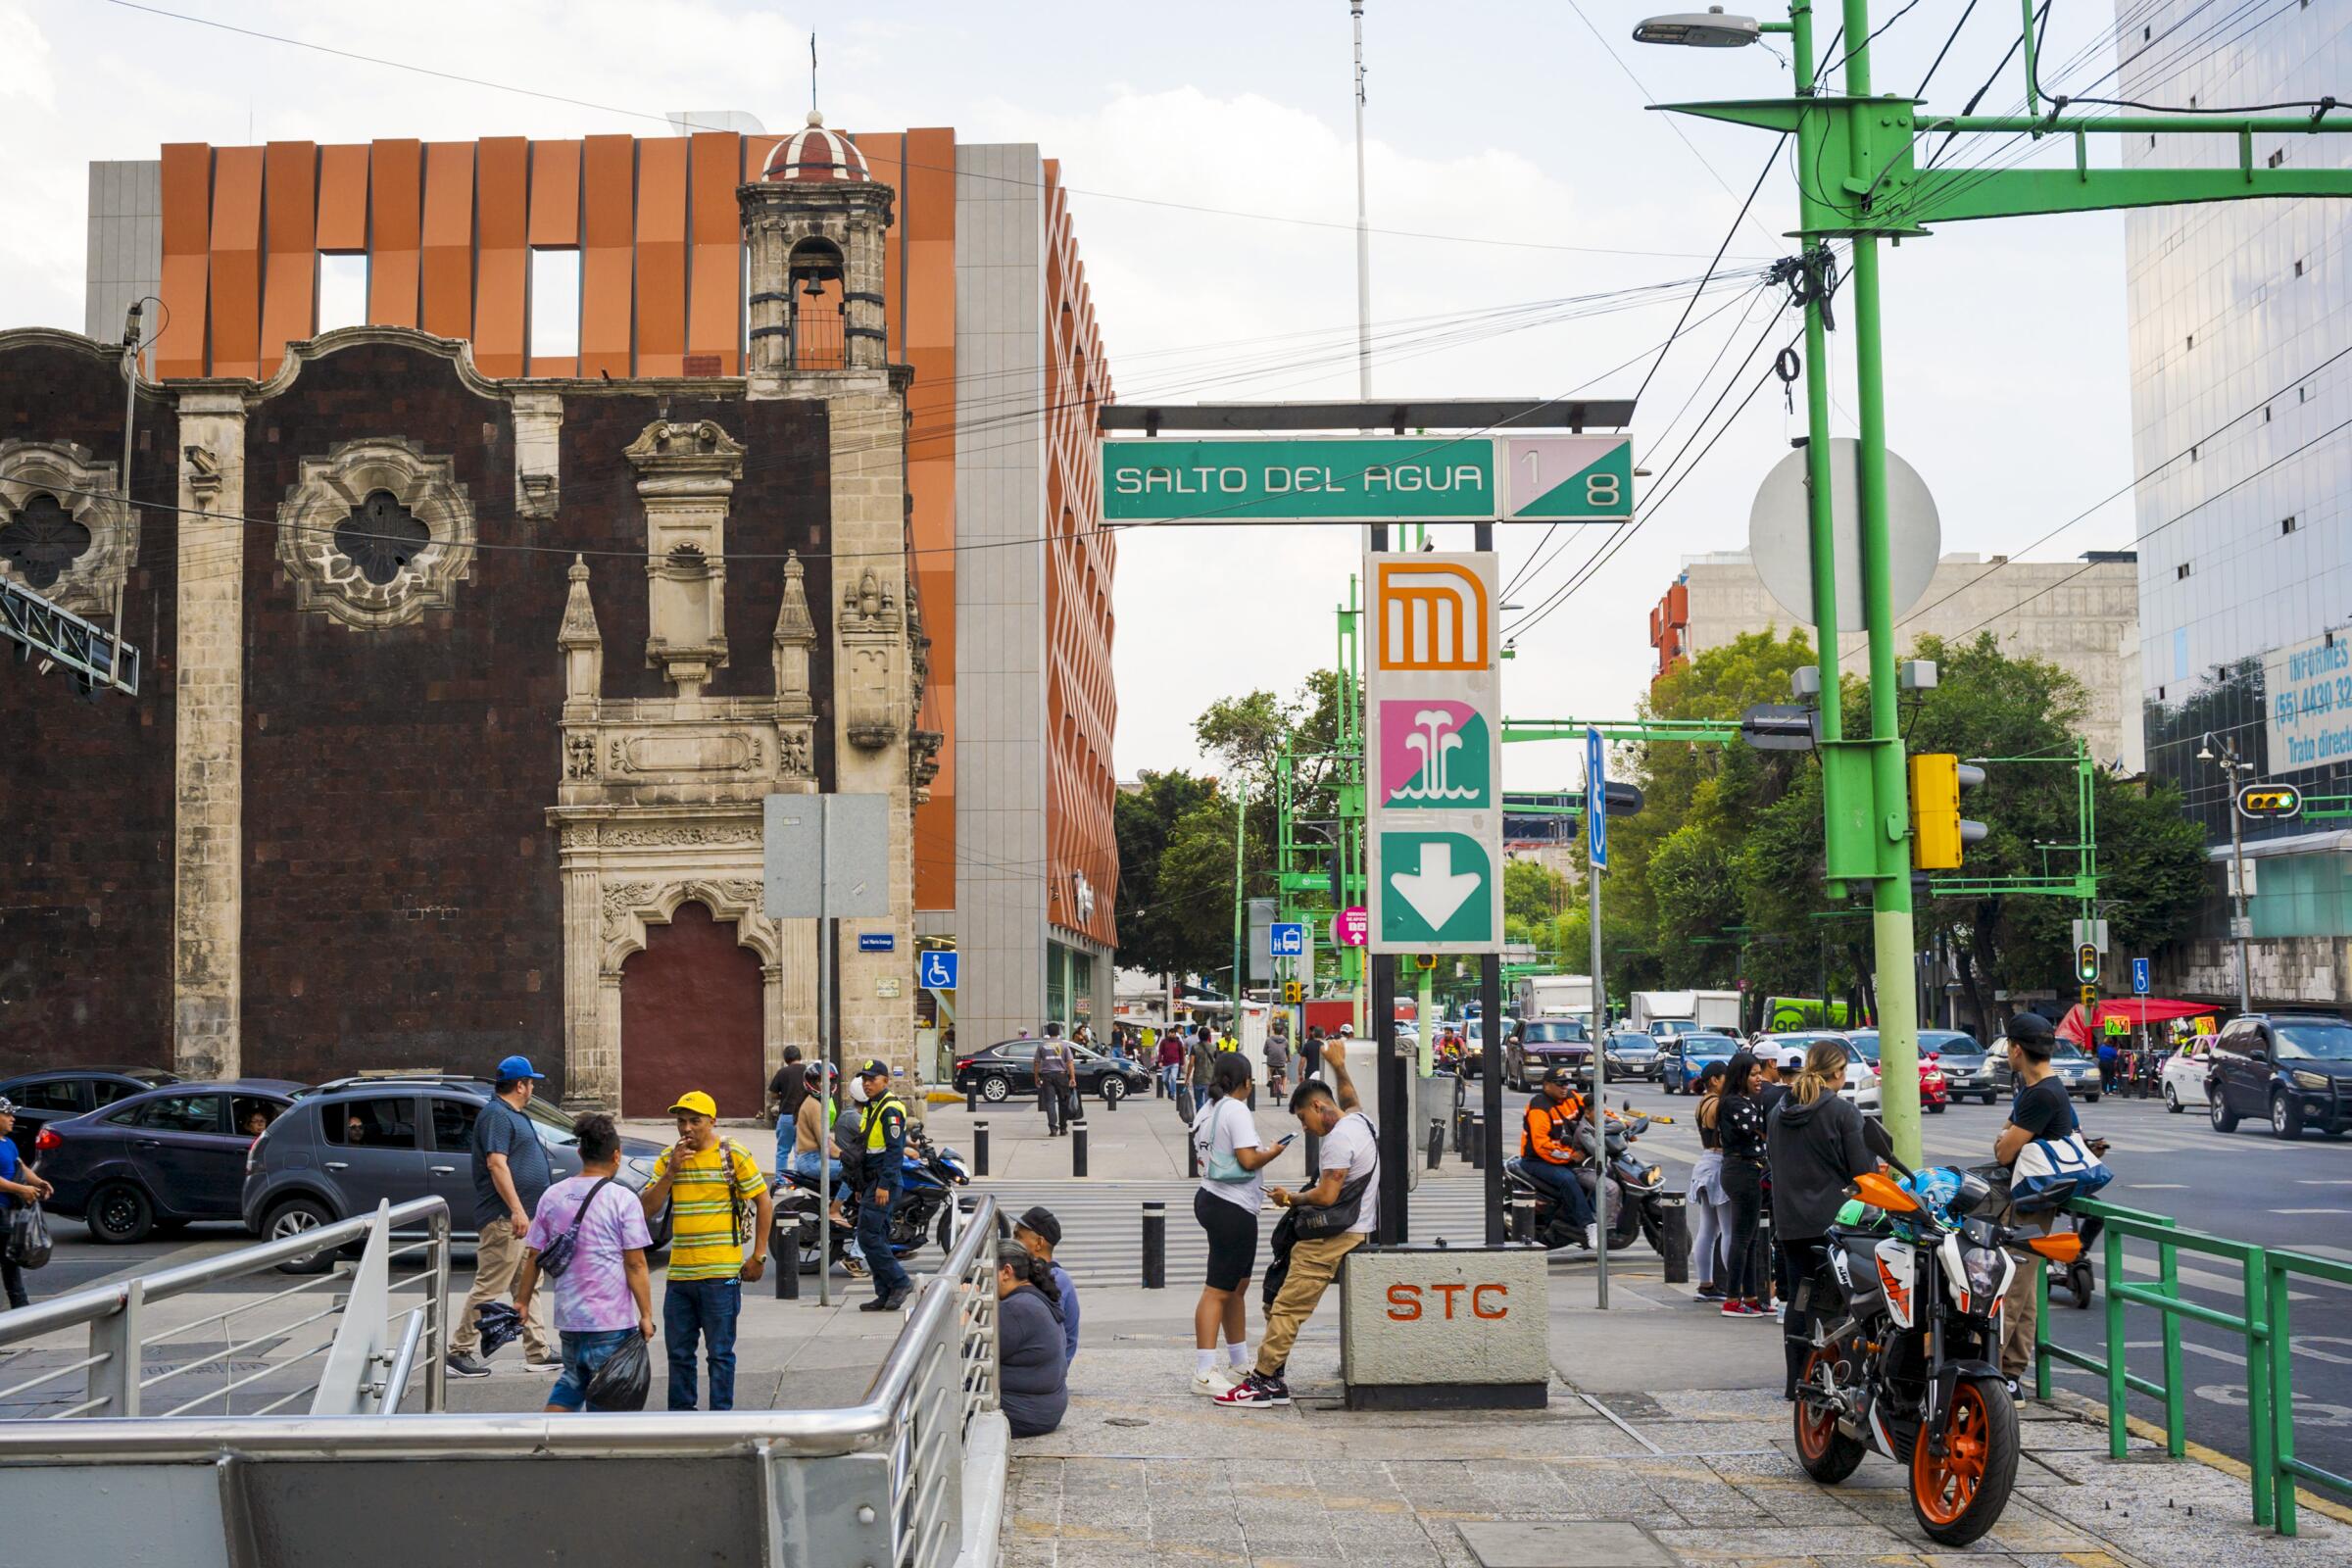 In Mexico City, life is a contact sport.